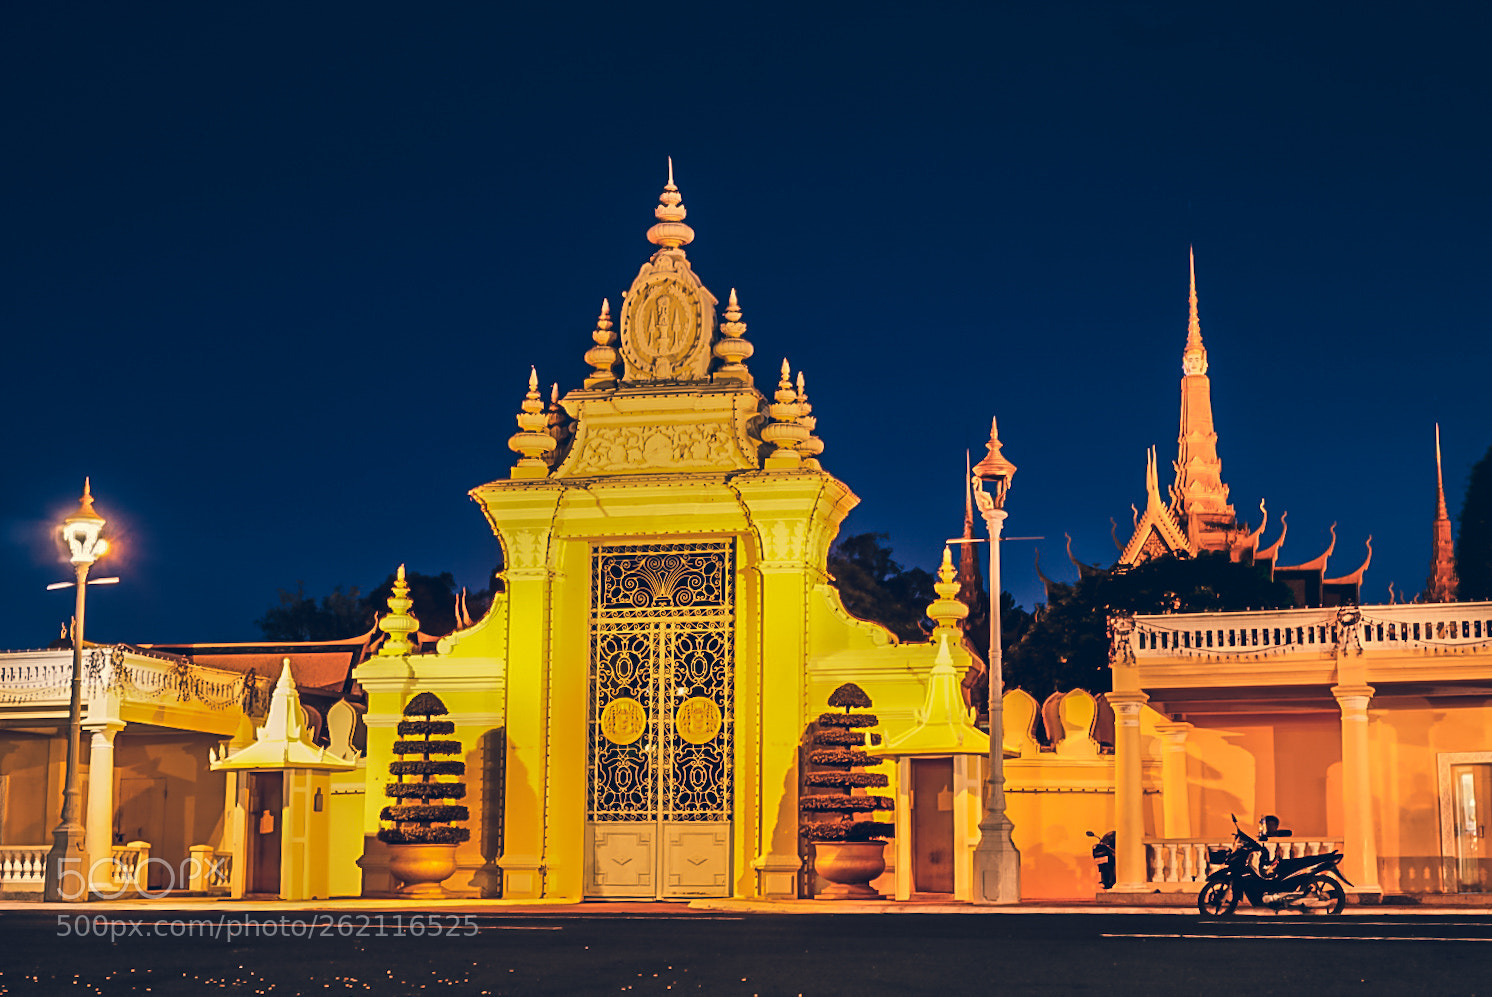 Sony a6000 sample photo. Royal palace in cambodia ?? photography